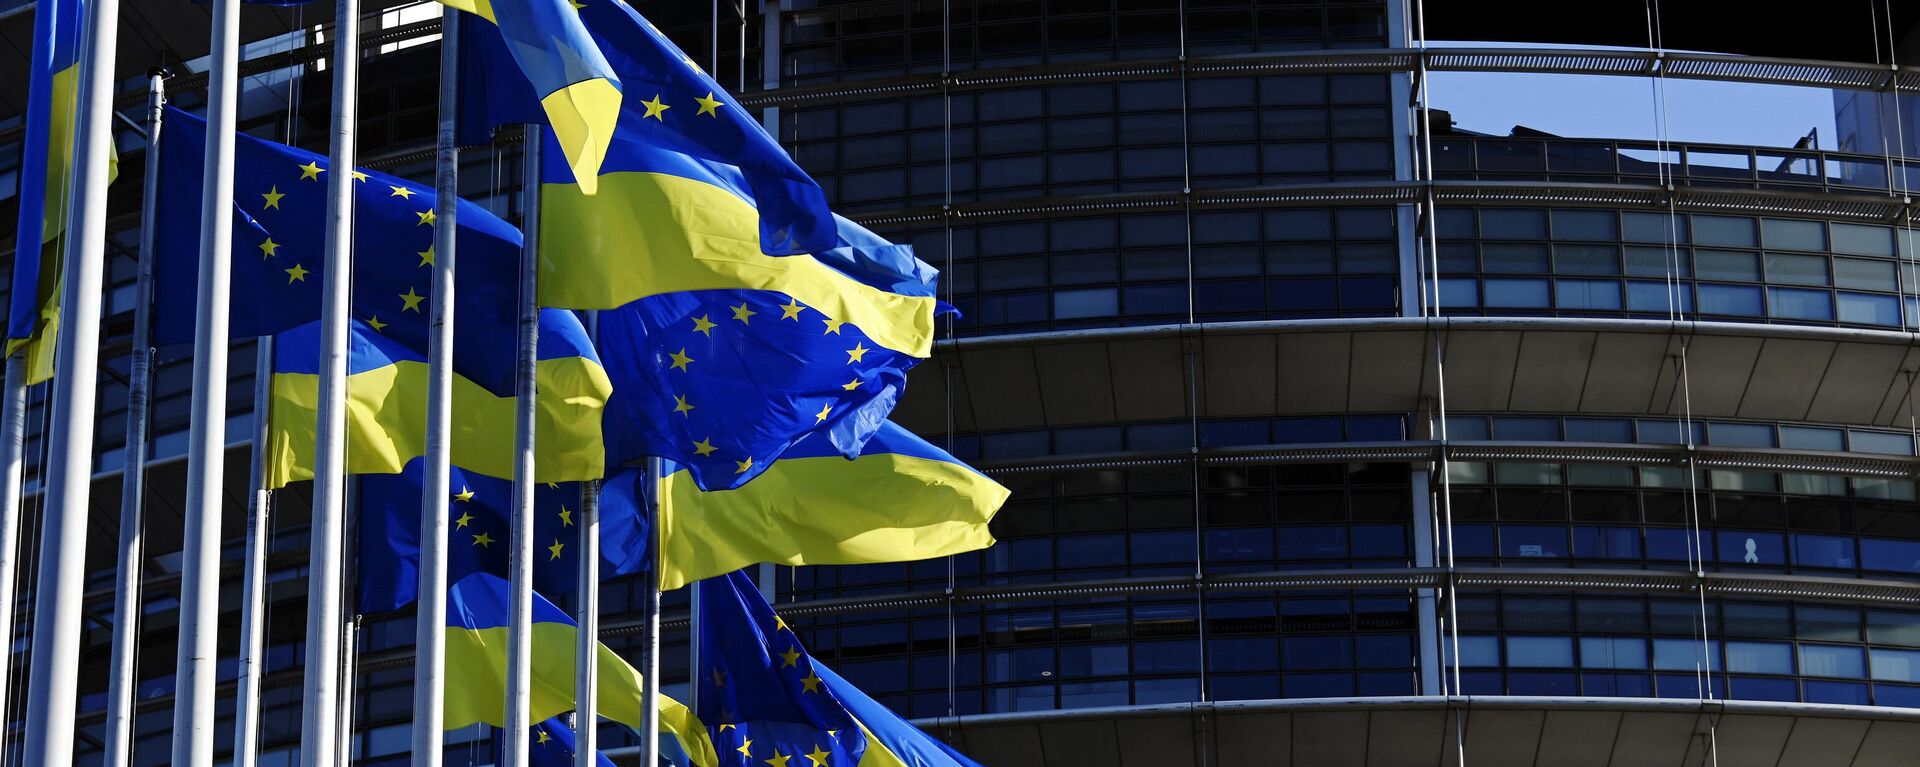 A picture taken on March 8, 2022 shows European Union's and Ukrainian flags fluttering outside the European Parliament in Strasbourg, eastern France. - Sputnik International, 1920, 13.03.2022